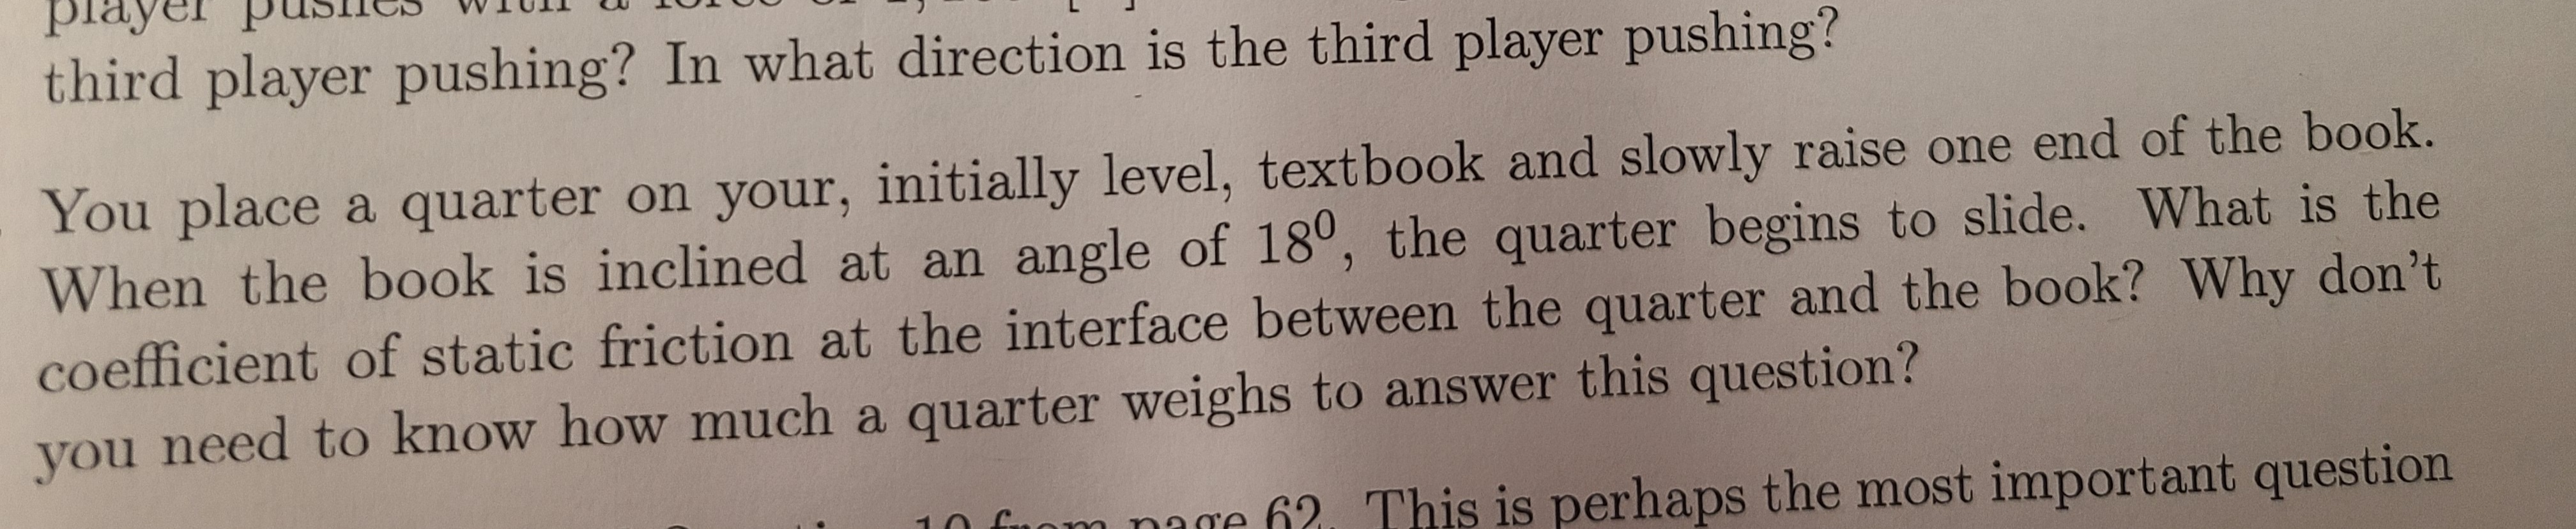 You place a quarter on your, initially level, textbook and slowly raise one end of the book.
When the book is inclined at an angle of 18°, the quarter begins to slide. What is the
coefficient of static friction at the interface between the quarter and the book? Why don't
you
u need to know how much a quarter weighs to answer this question?
hung the most important question
